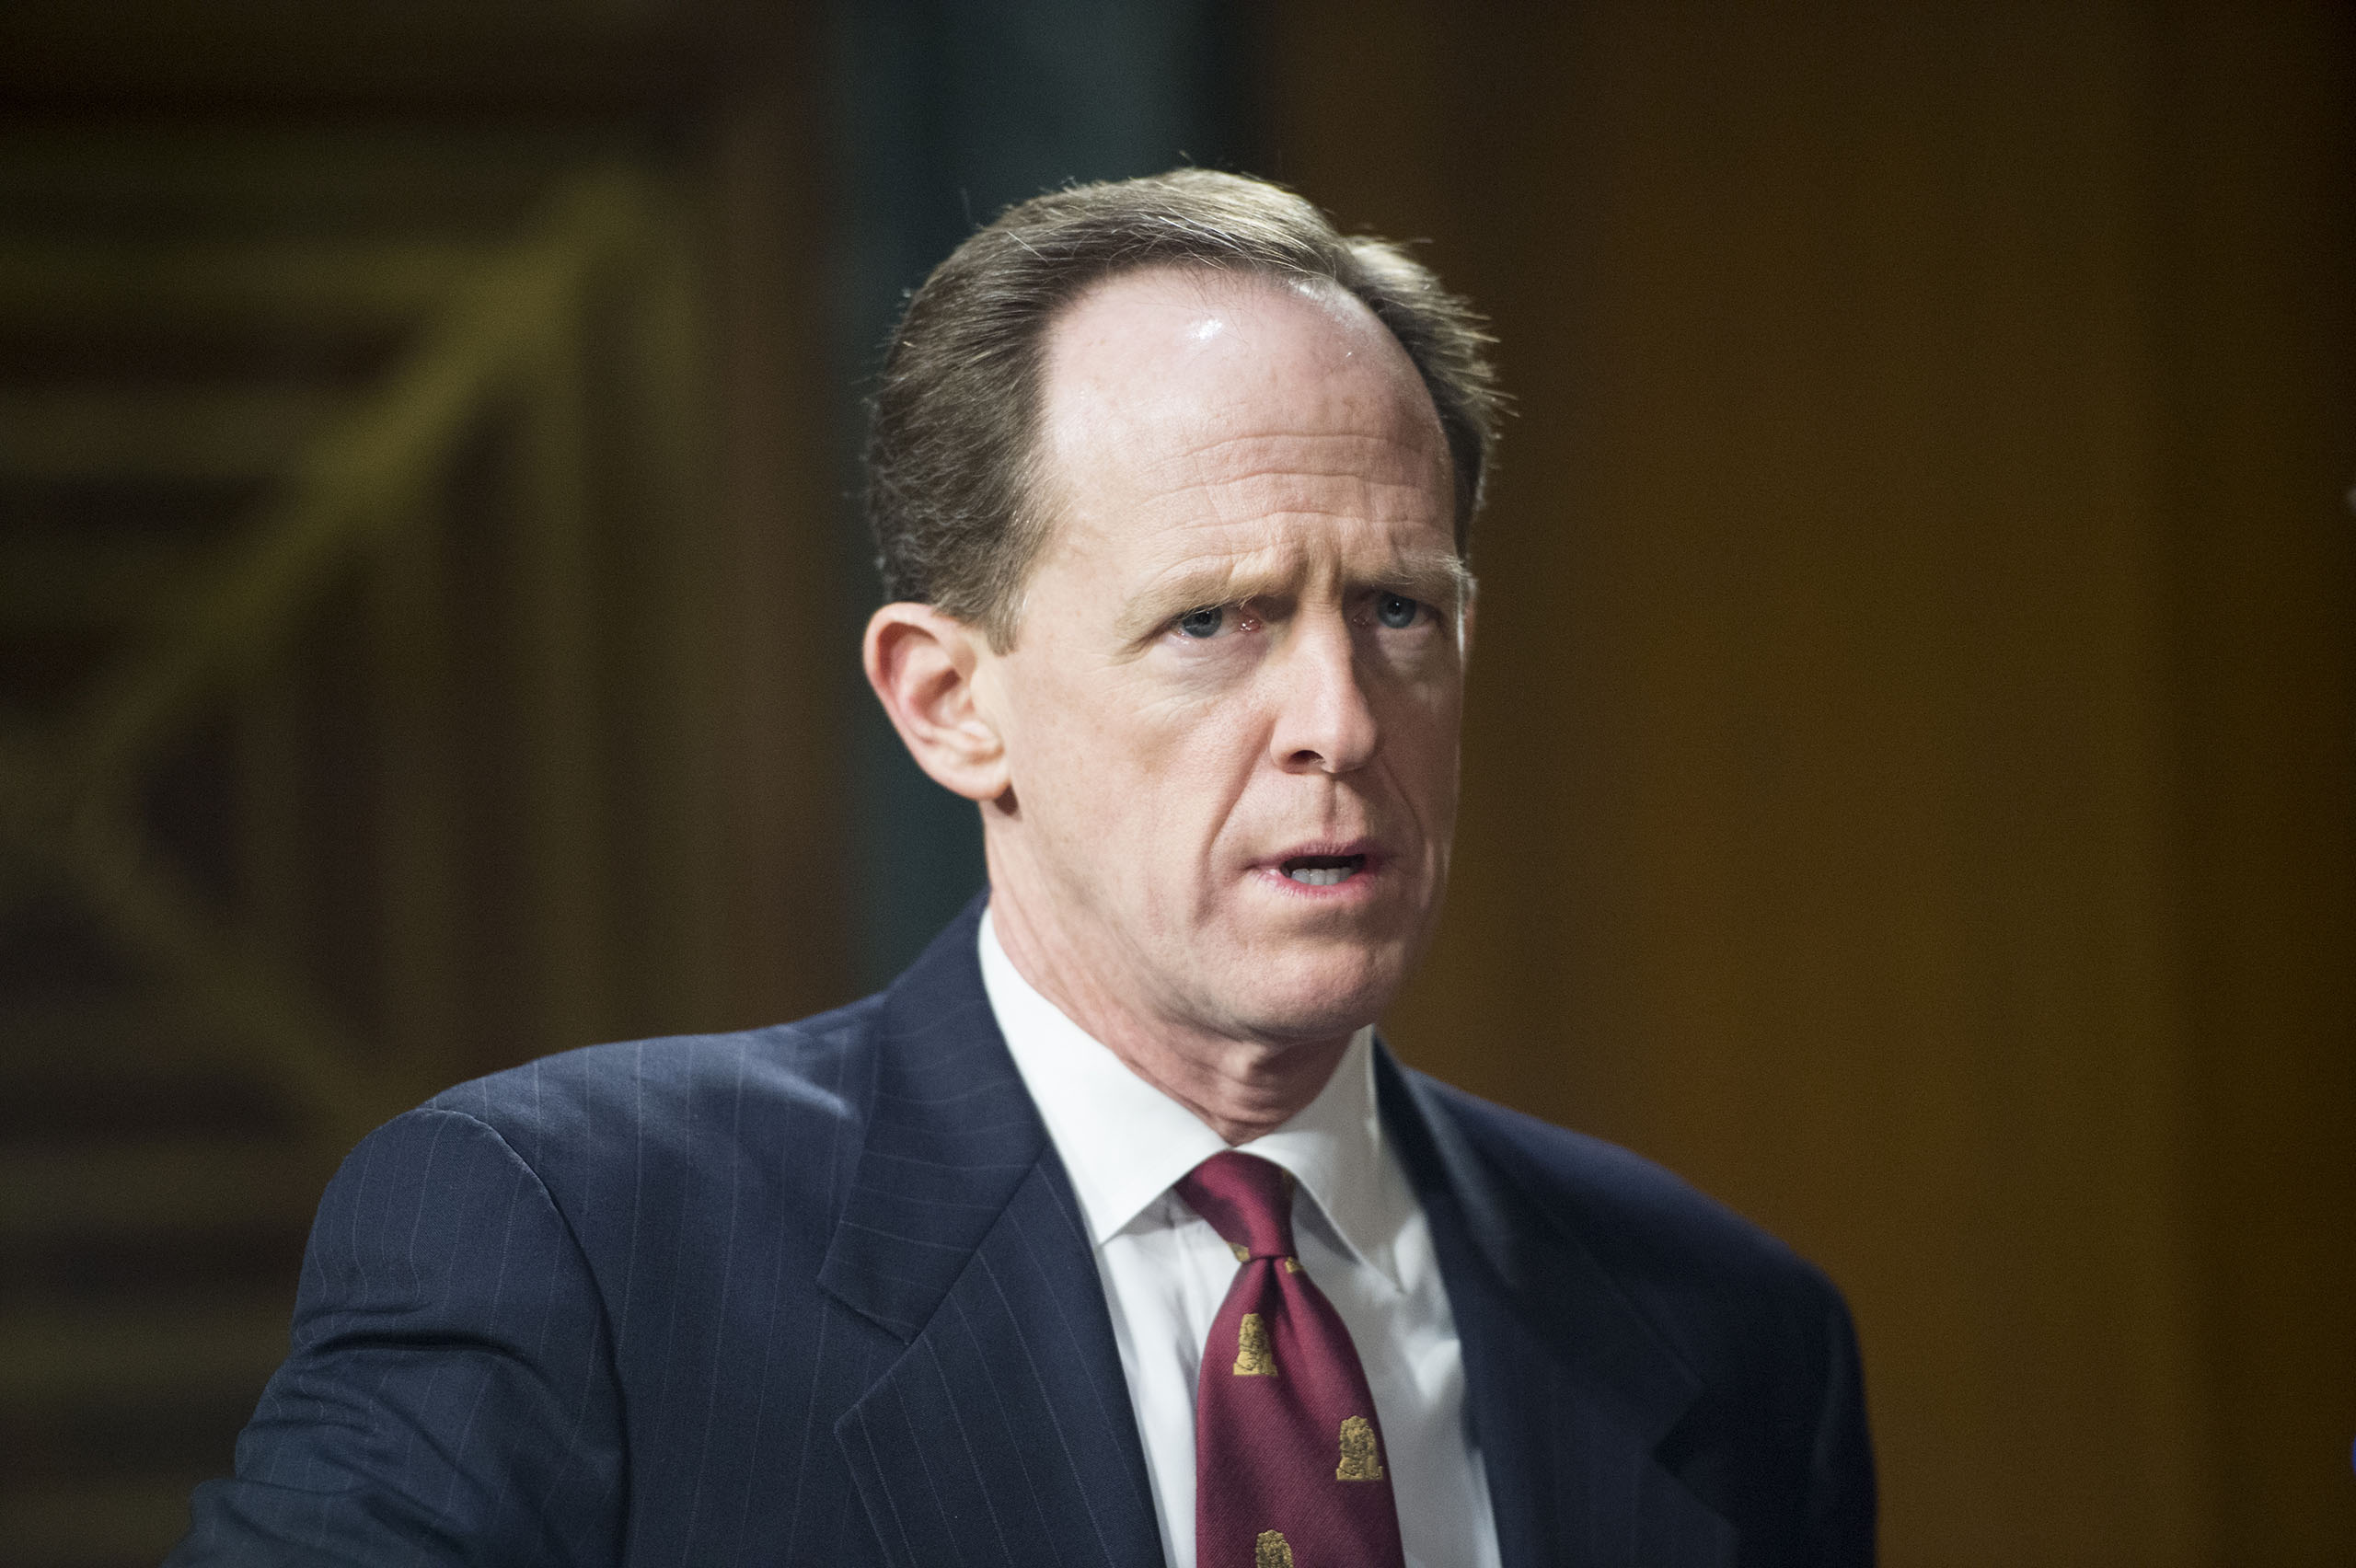 Pat Toomey arrives for the Senate Banking, Housing and Urban Affairs Committee hearing on "The Semiannual Monetary Policy Report to the Congress" on Feb. 24, 2015. (Bill Clark—CQ Roll Call/Getty Images)